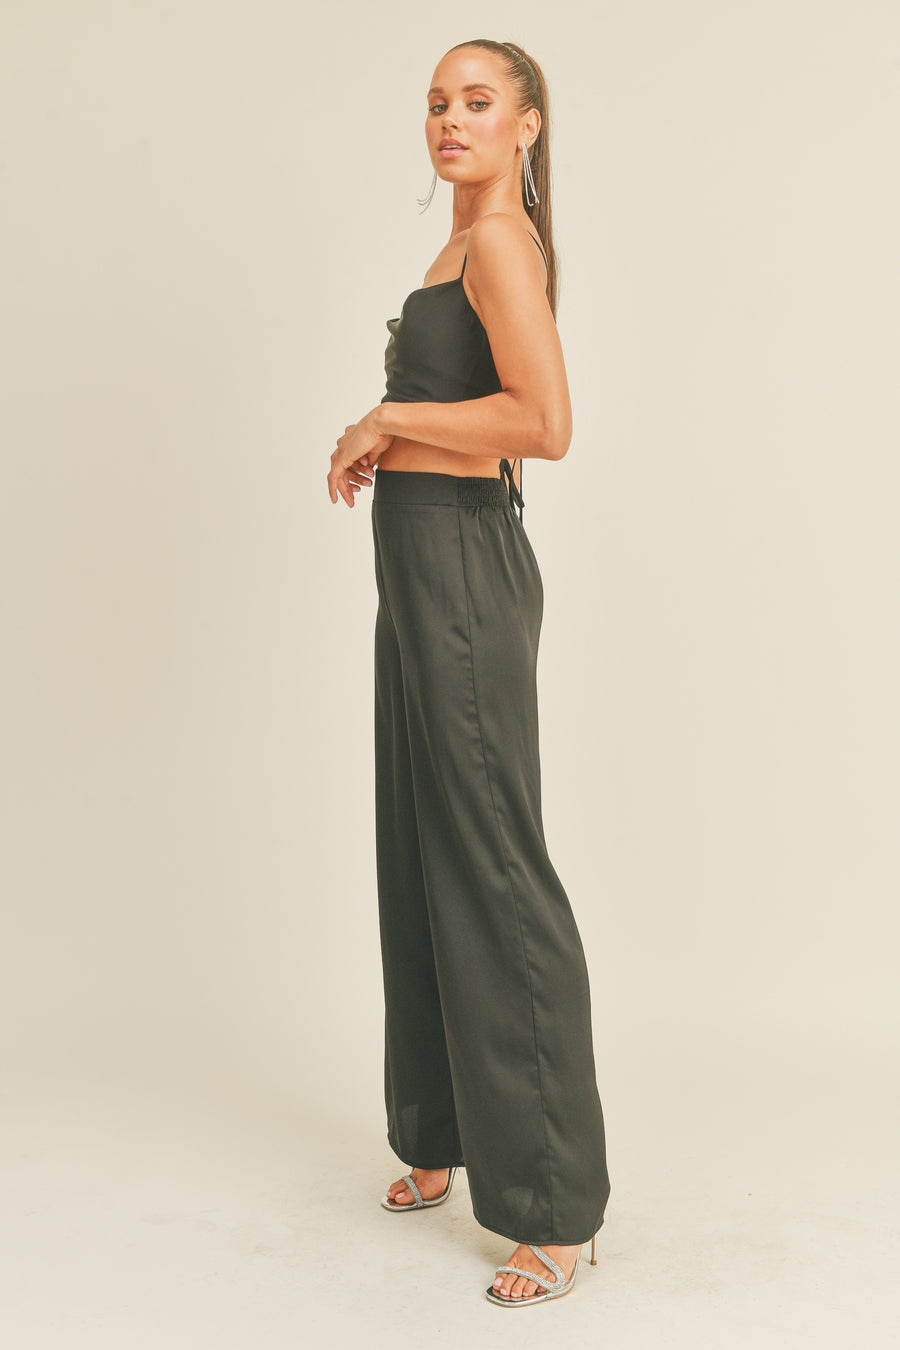 The Aniston Satin Top + Pants Set - Sold Separately *Runway Exclusive*